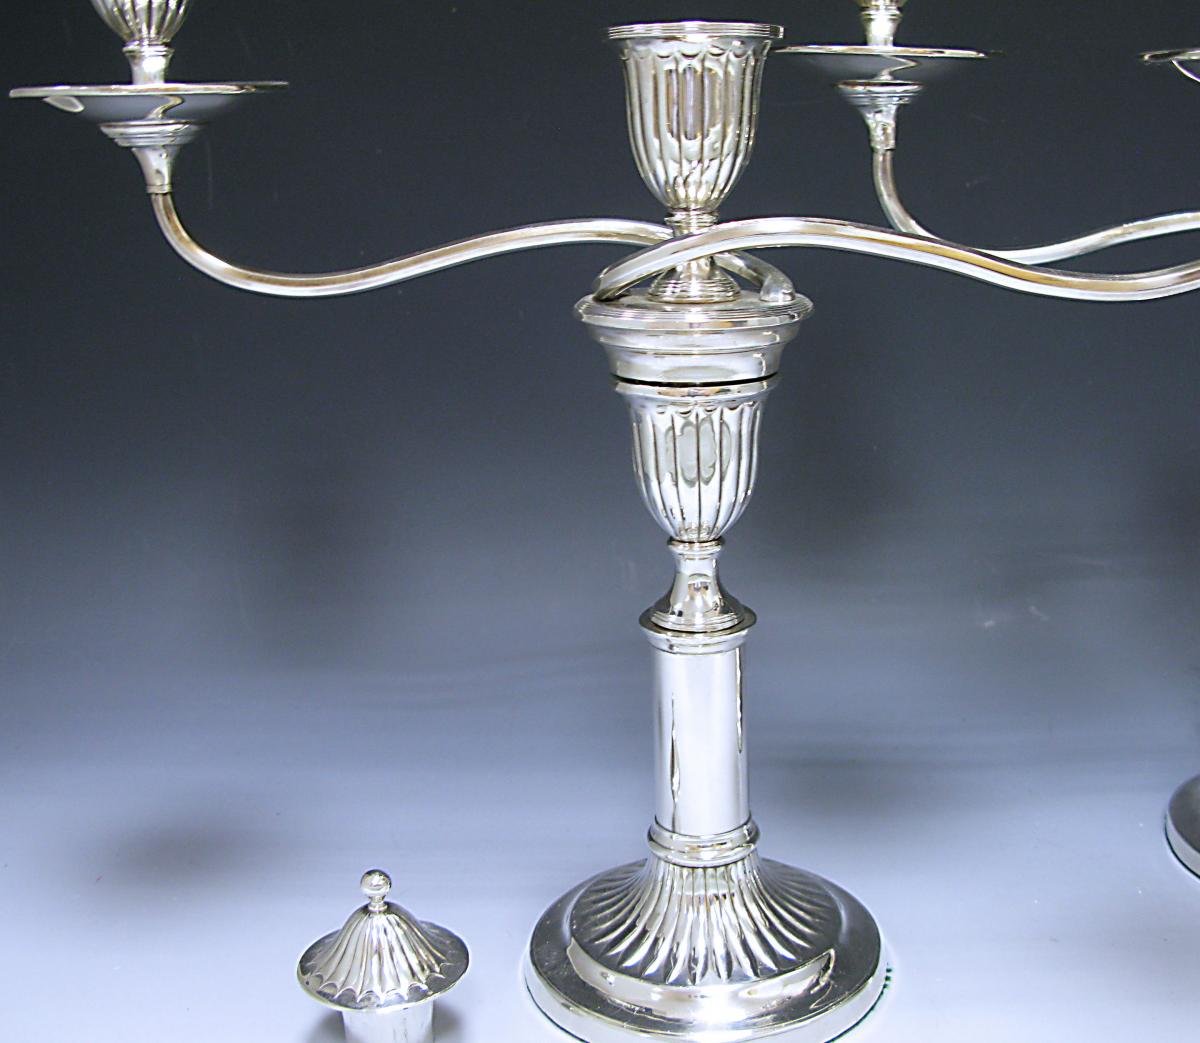 Pair of Old Sheffield Plate silver Telescopic Candelabra